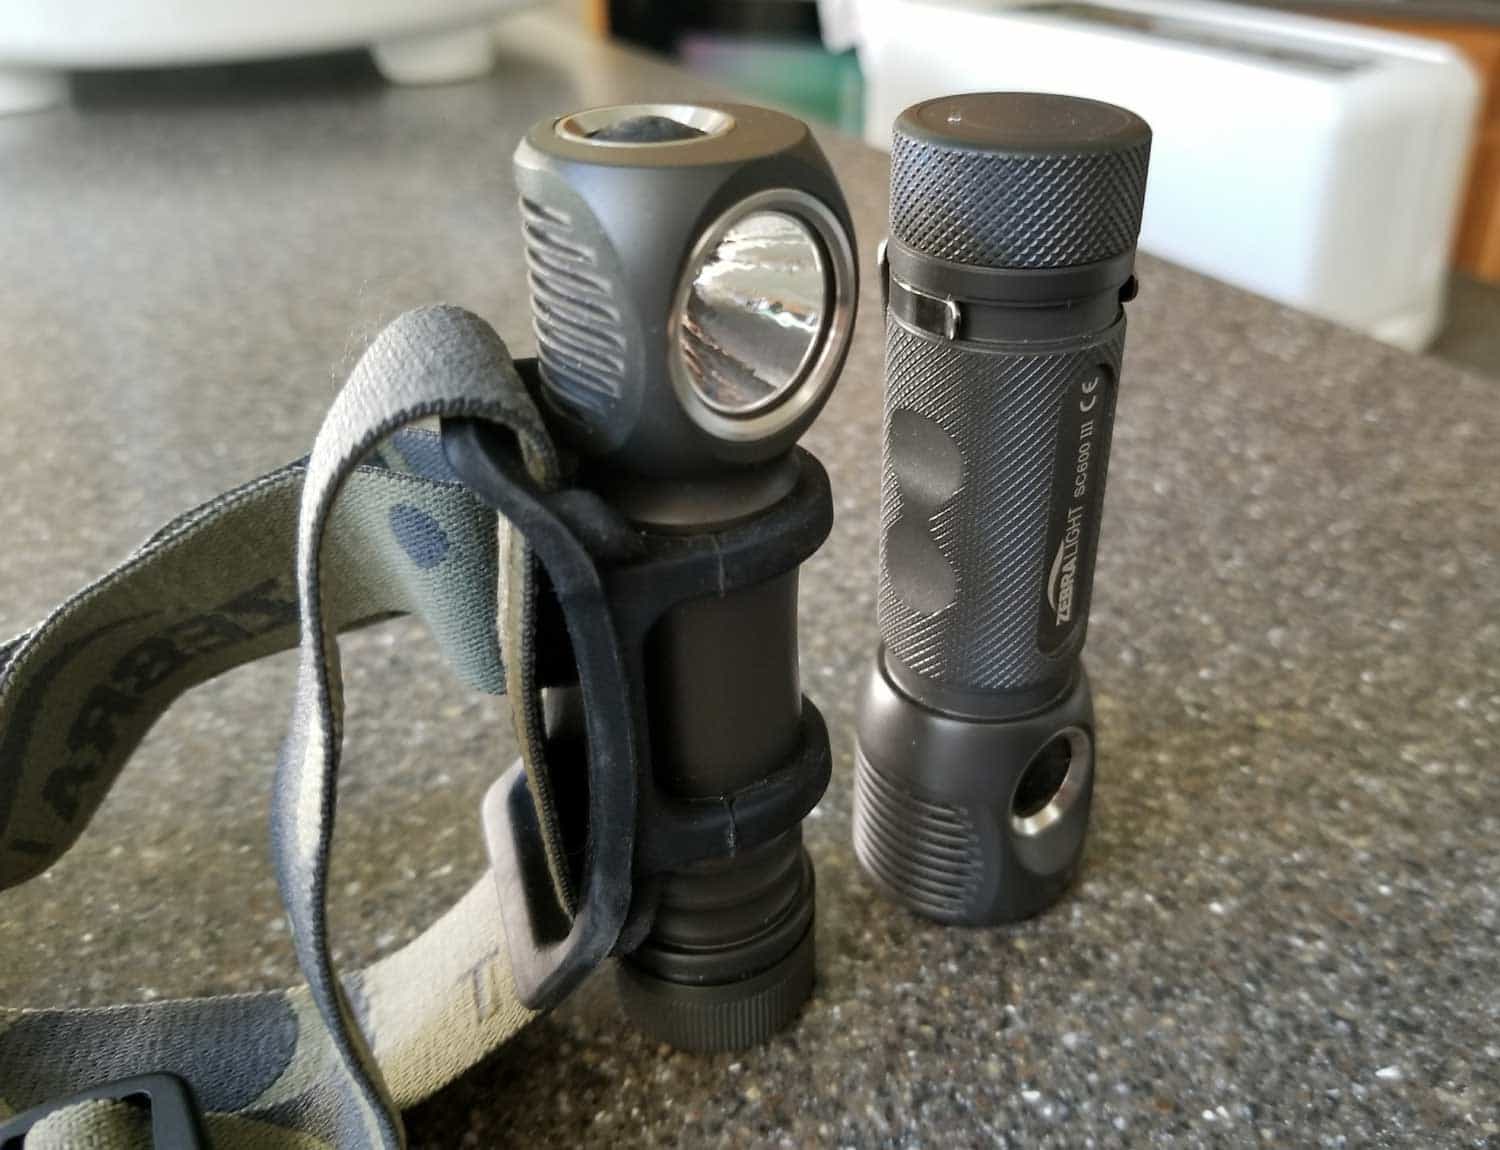 Product Recommendation: ZebraLight H600w and SC600 - Your Personal Ninja